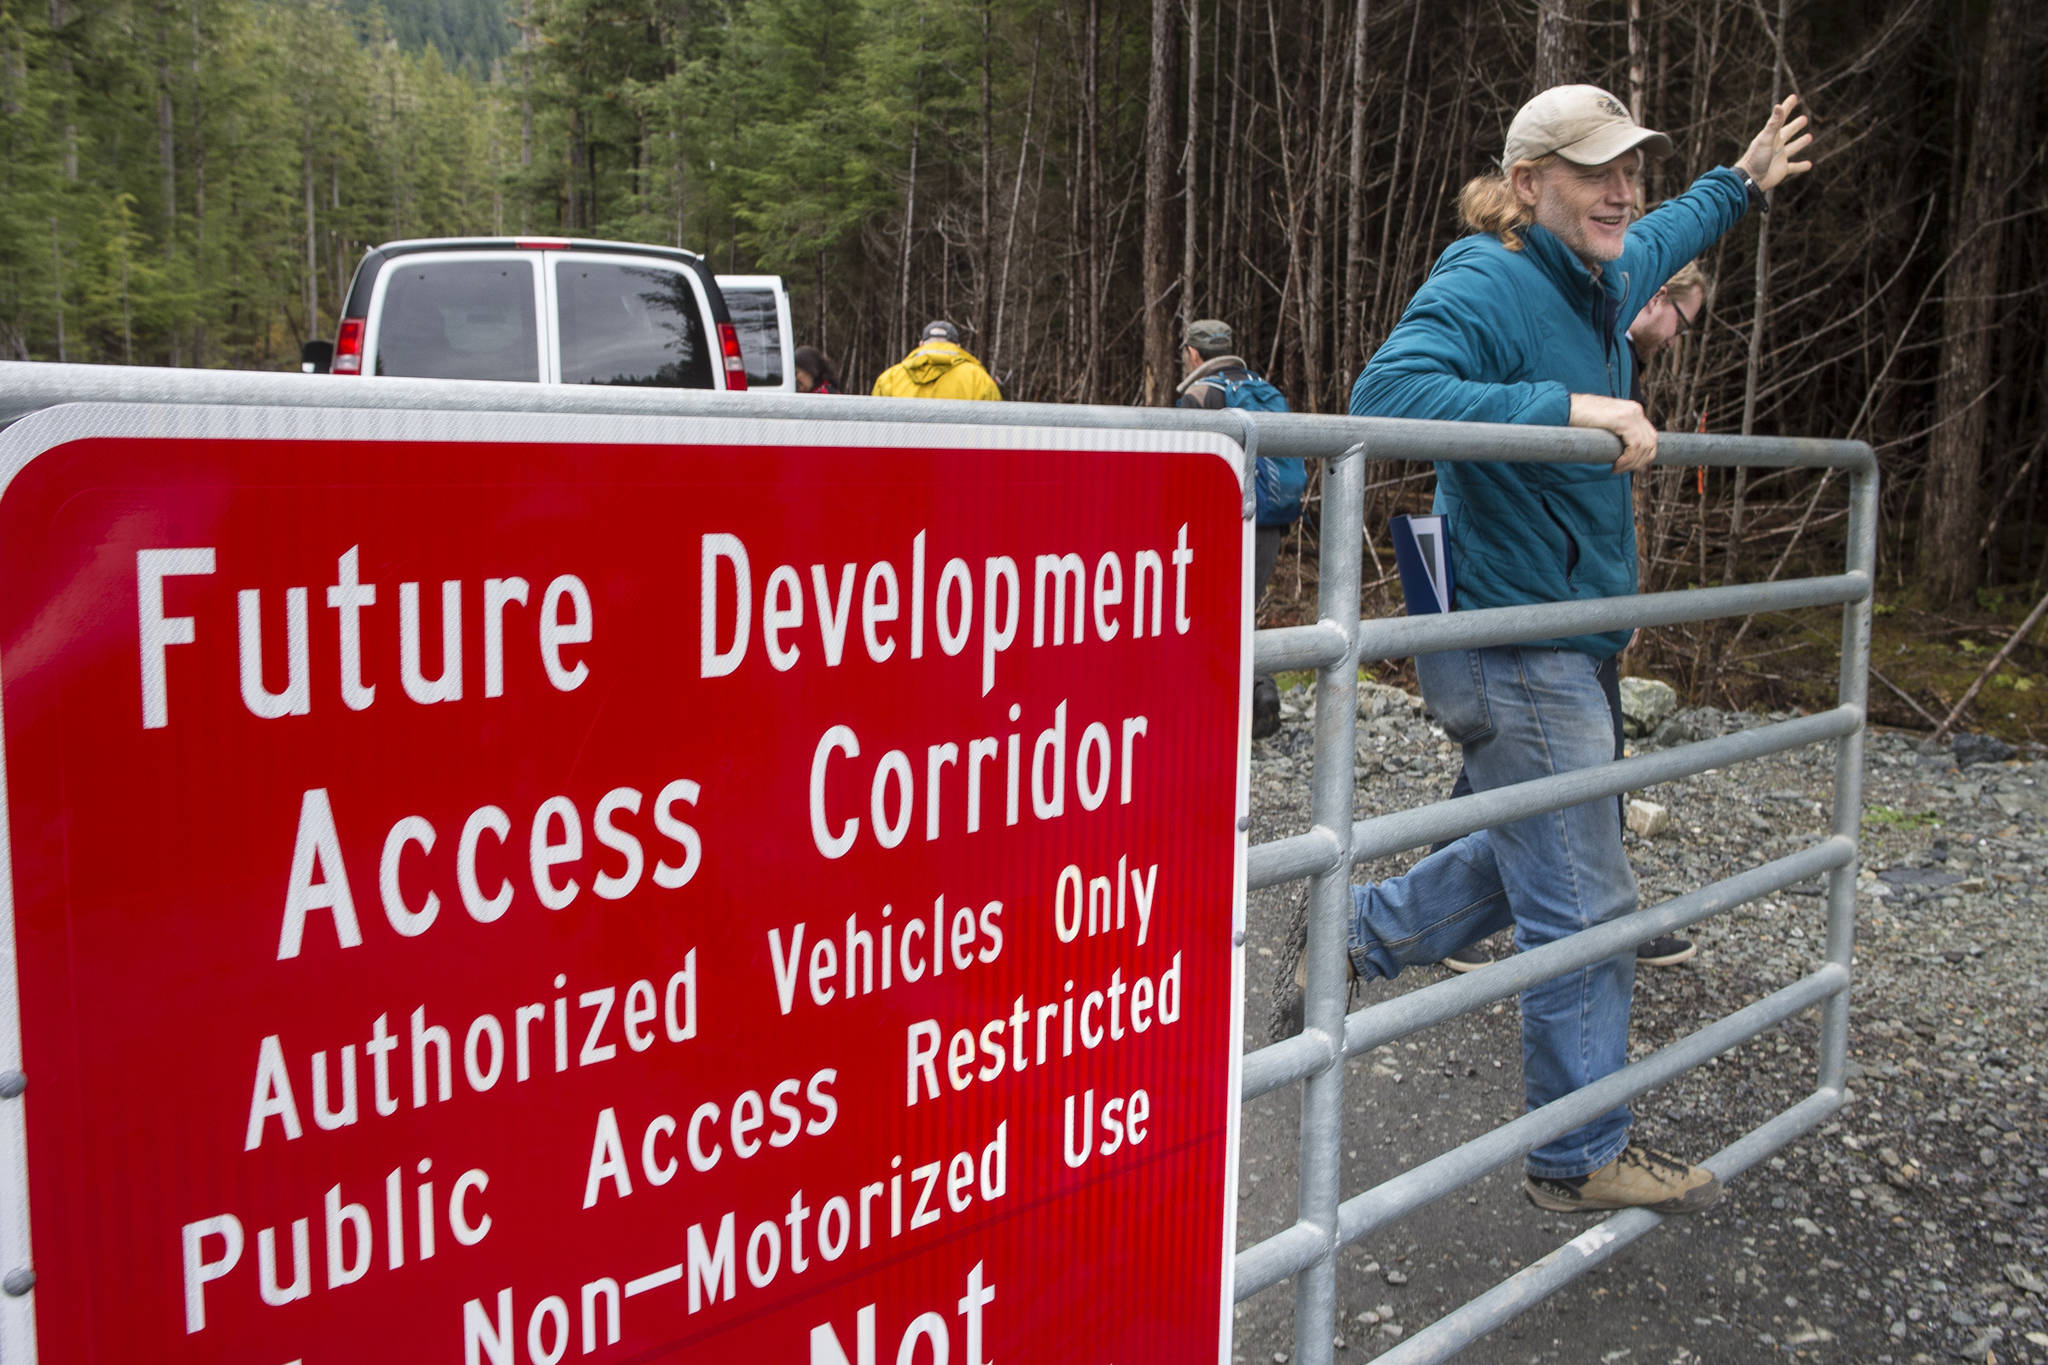 Alan Steffert, project manager for the city, closes the gate to the West Douglas Pioneer Road after a ribbon cutting ceremony to officially open the West Douglas Pioneer Road on Friday, Sept. 28, 2018. (Michael Penn | Juneau Empire)